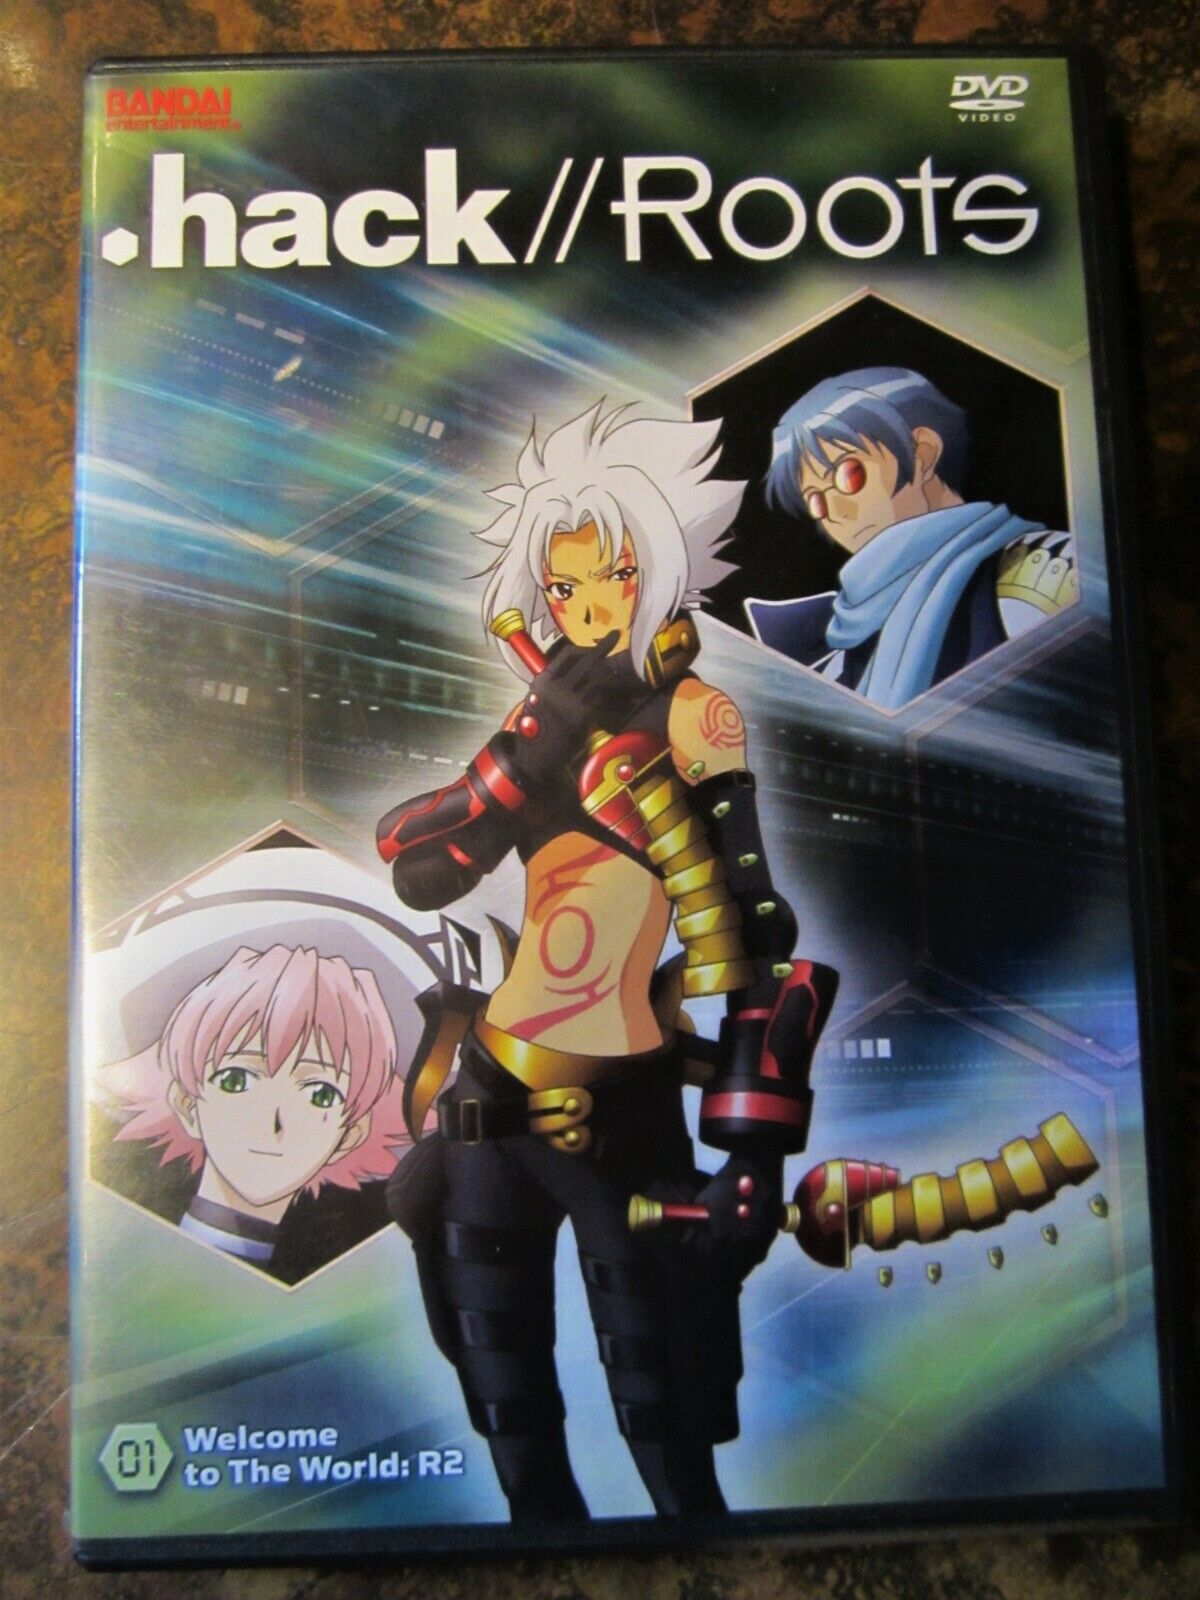 .hack Roots DVD 1: Welcome to The World:R2 *LIKE NEW CONDITION* | eBay